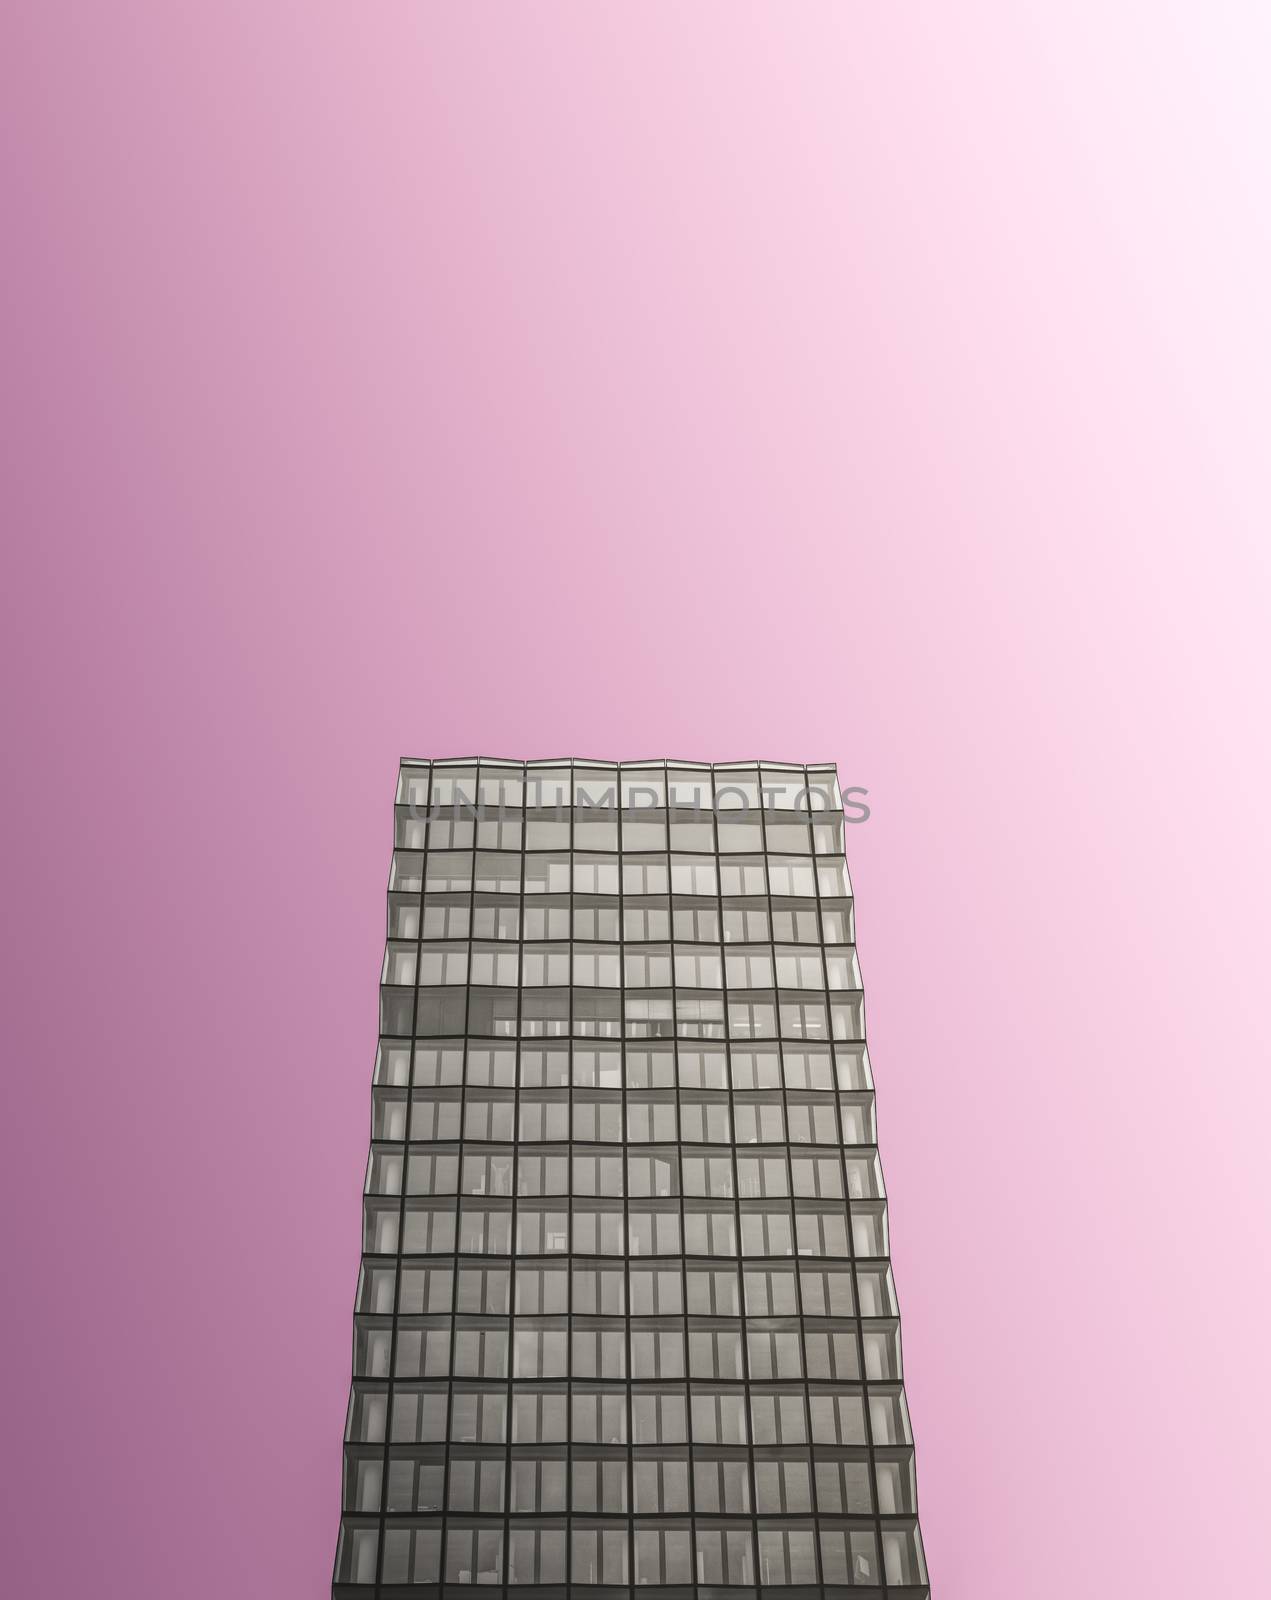 Black And White Modern Skyscraper Design On Pink With Copy Space